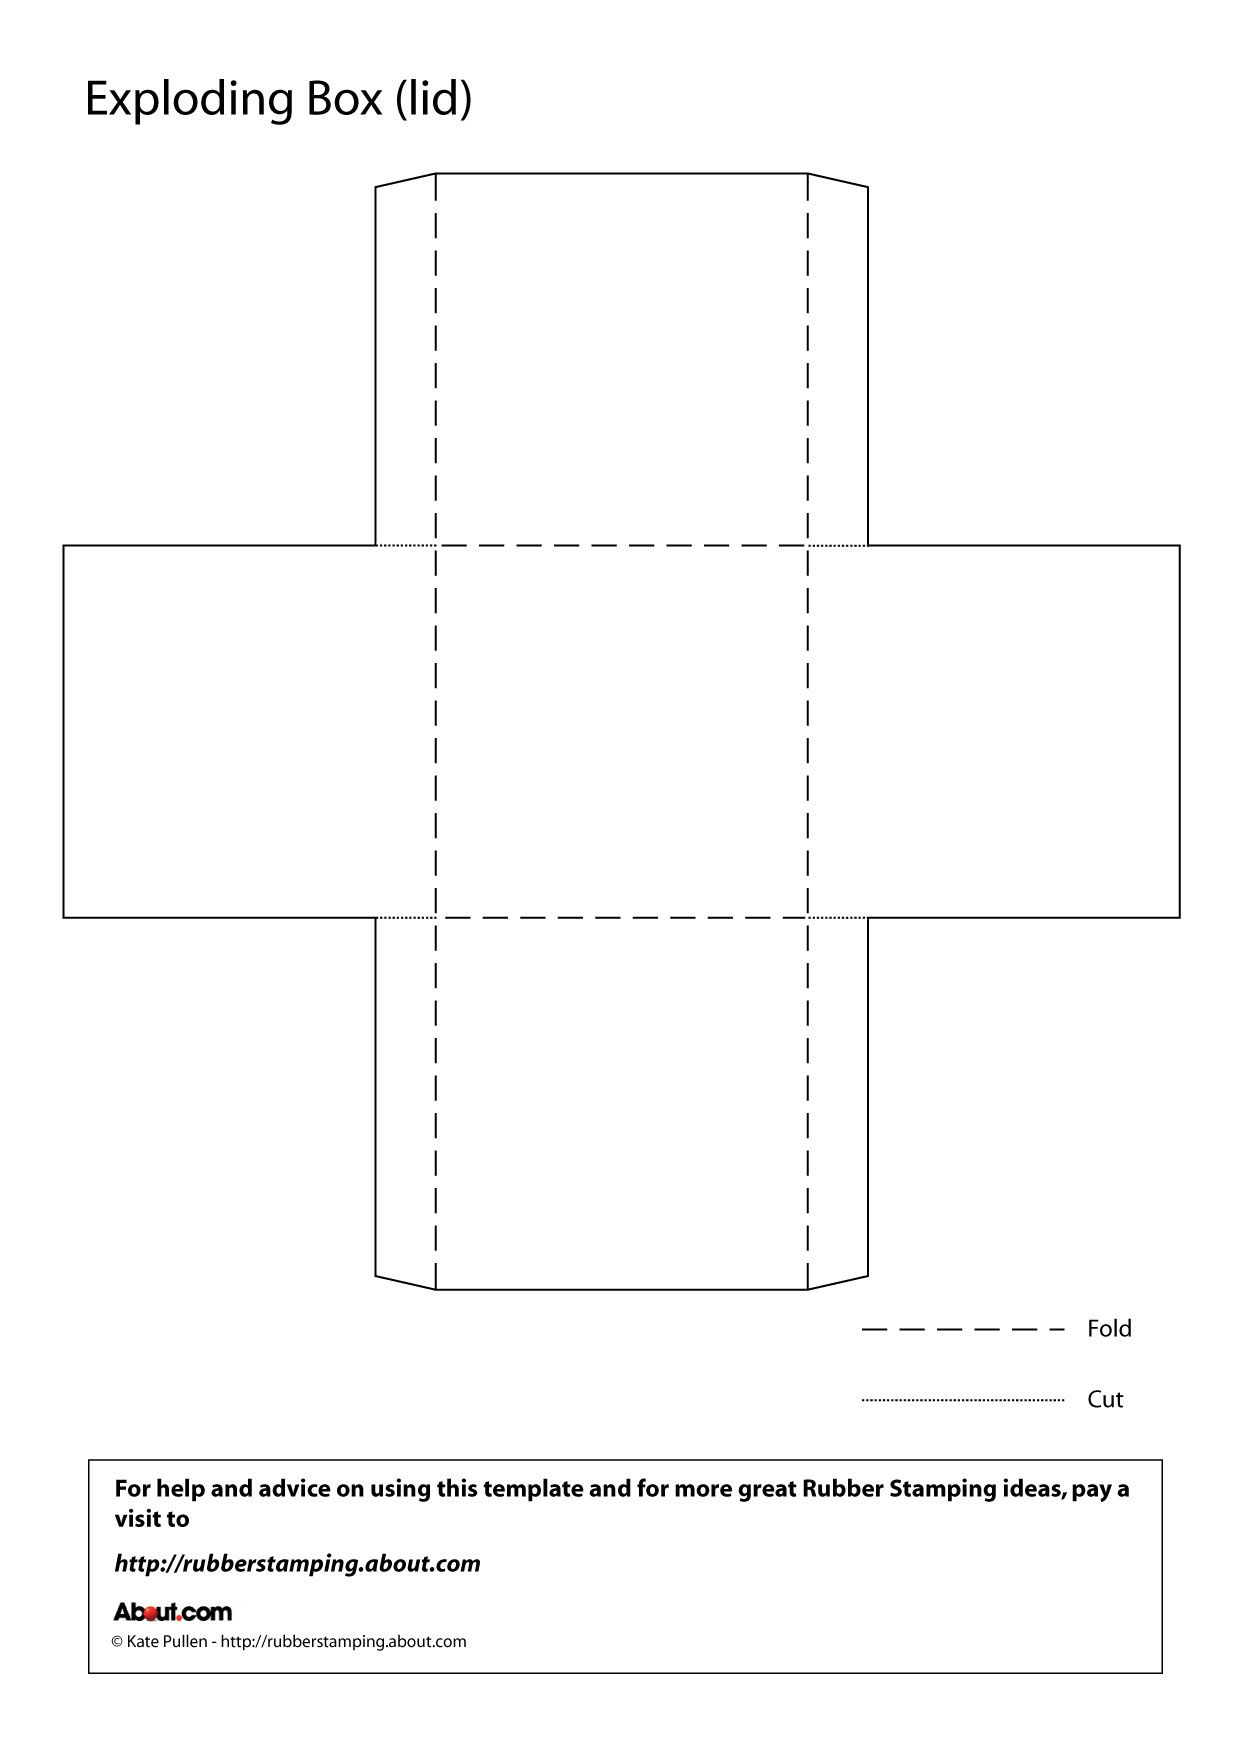 Printable Origami Box Instructions Make An Exploding Box With This Free Printable Template